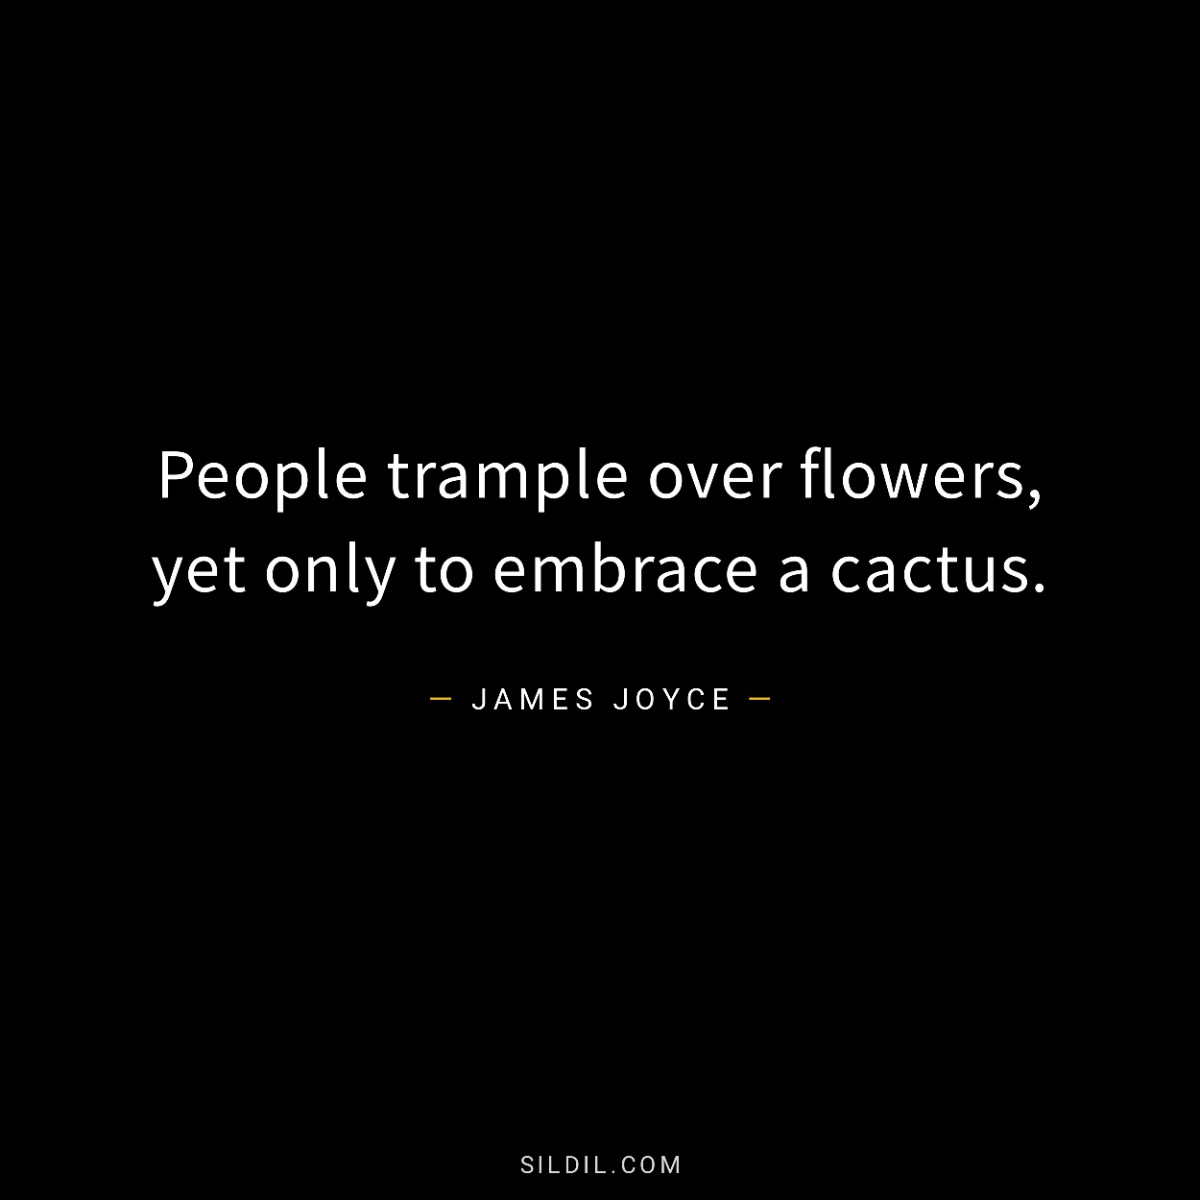 People trample over flowers, yet only to embrace a cactus.